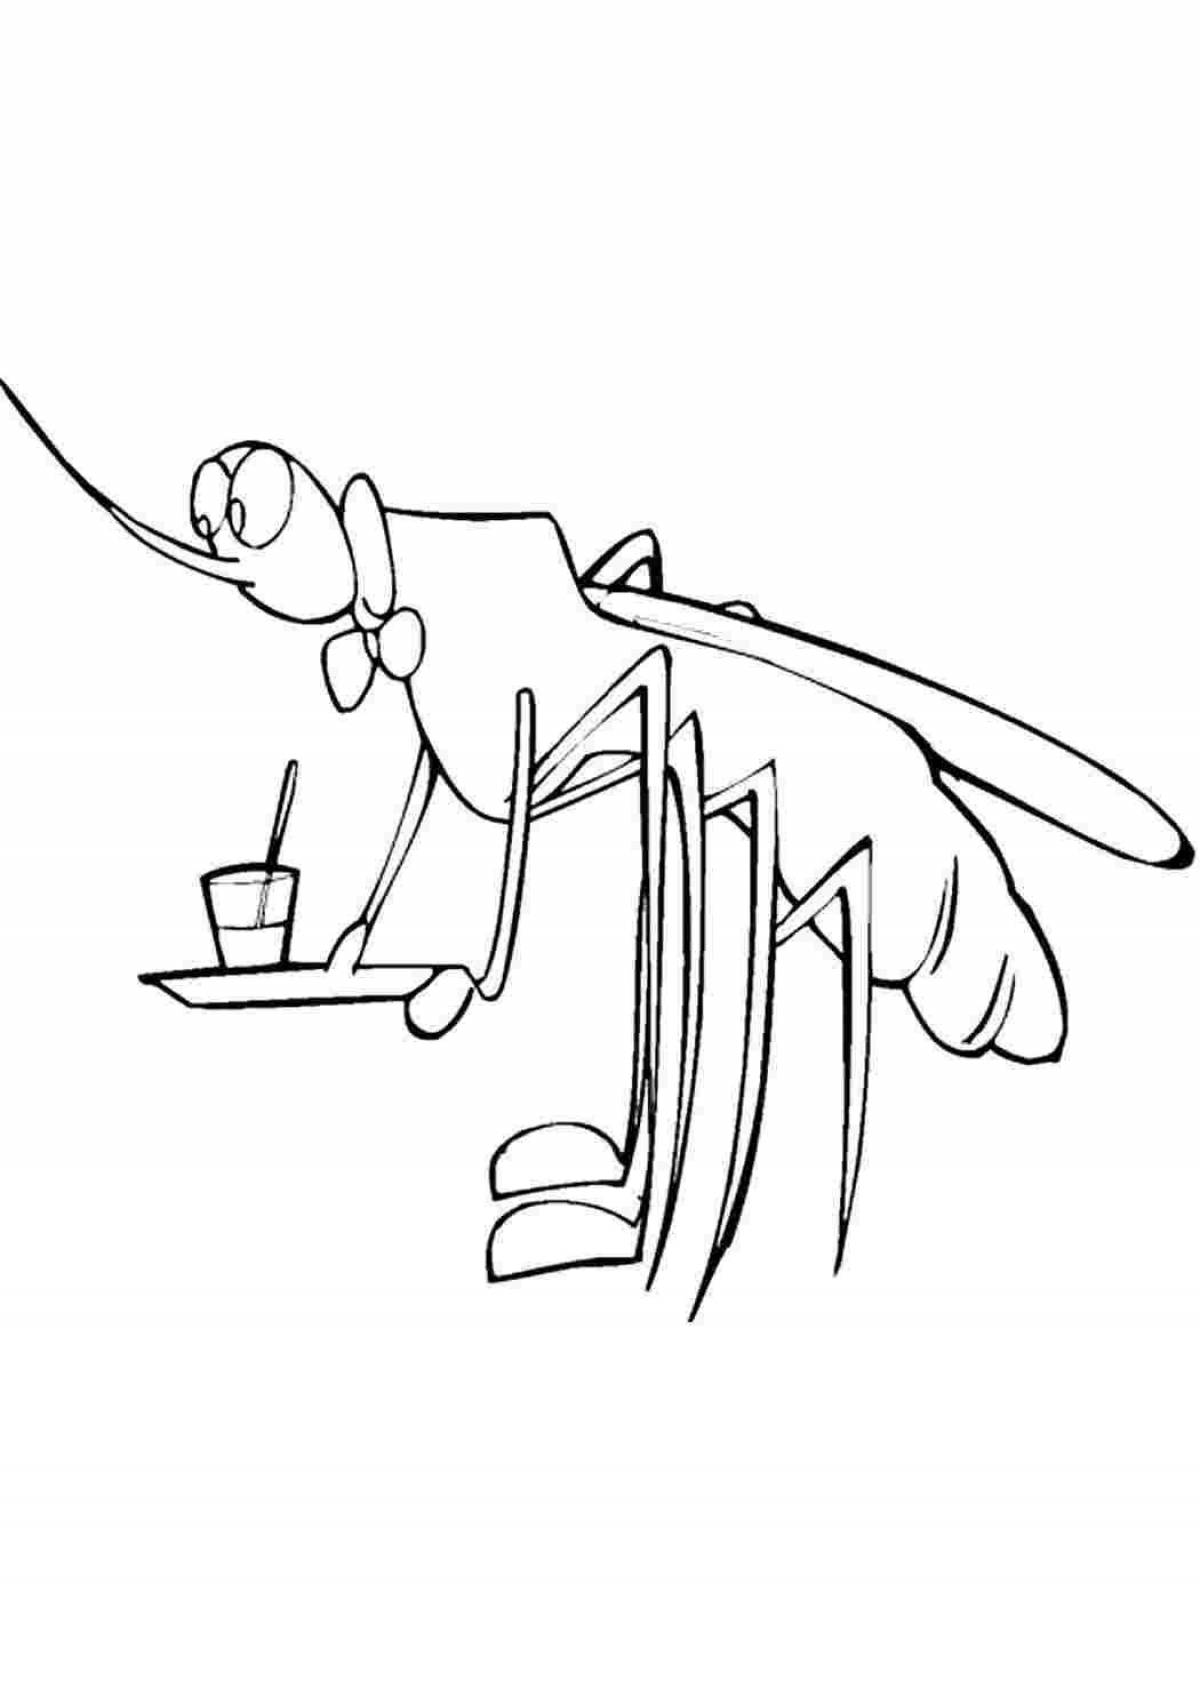 Intriguing mosquito coloring page